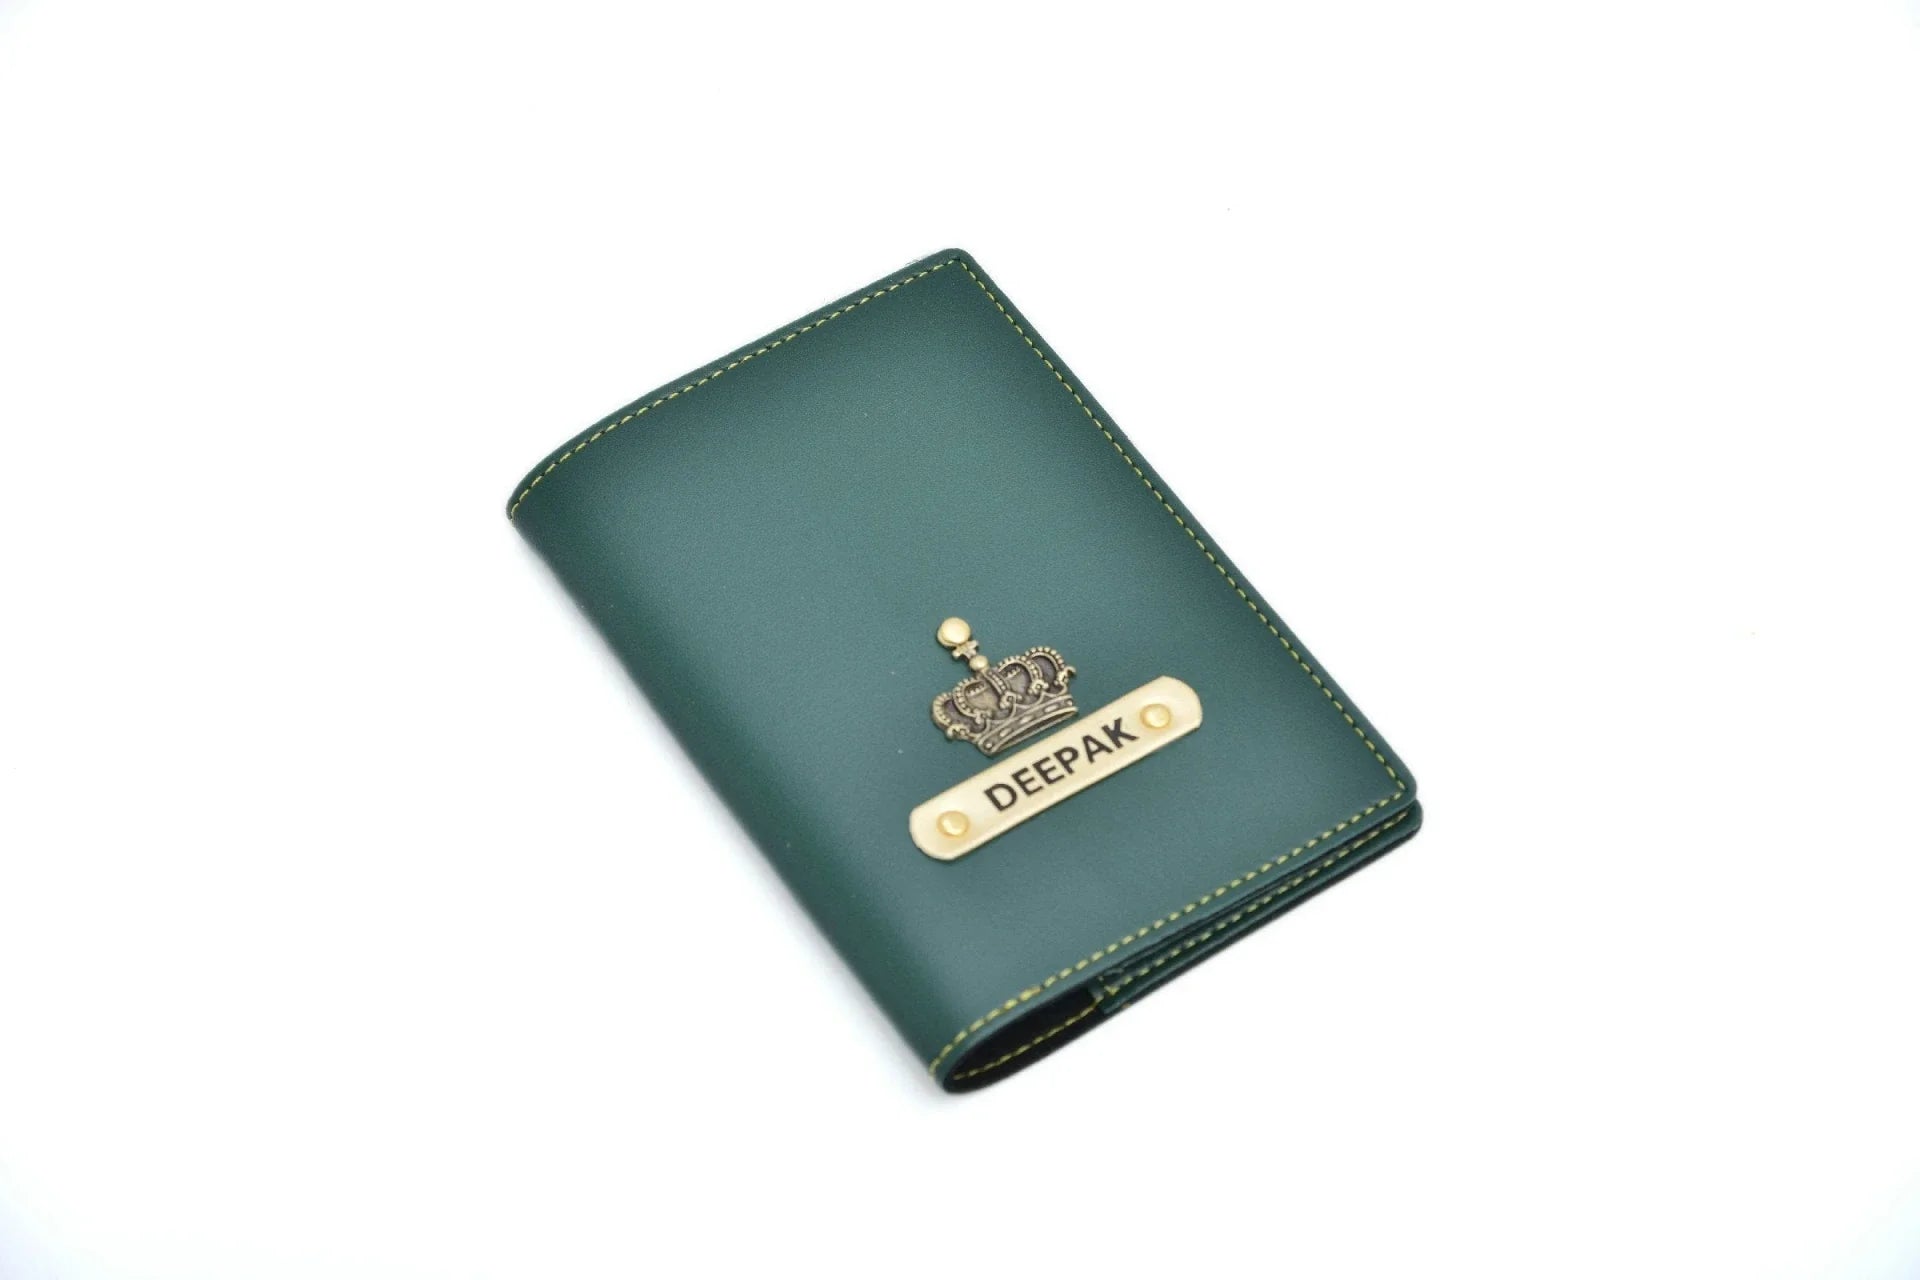 personalized-cb08-olive-green-customized-best-gift-for-boyfriend-girlfriend.A must-have travel accessory for today's minimalist traveler who seeks both style and function. With a personalized touch, it has your name and charm on it with its attractive finish.The case with its sturdy build ensures protection of your passport during traveling shenanigans! It carries your passport, money, cards etc. at one place. Material-vegan/synthetic leather